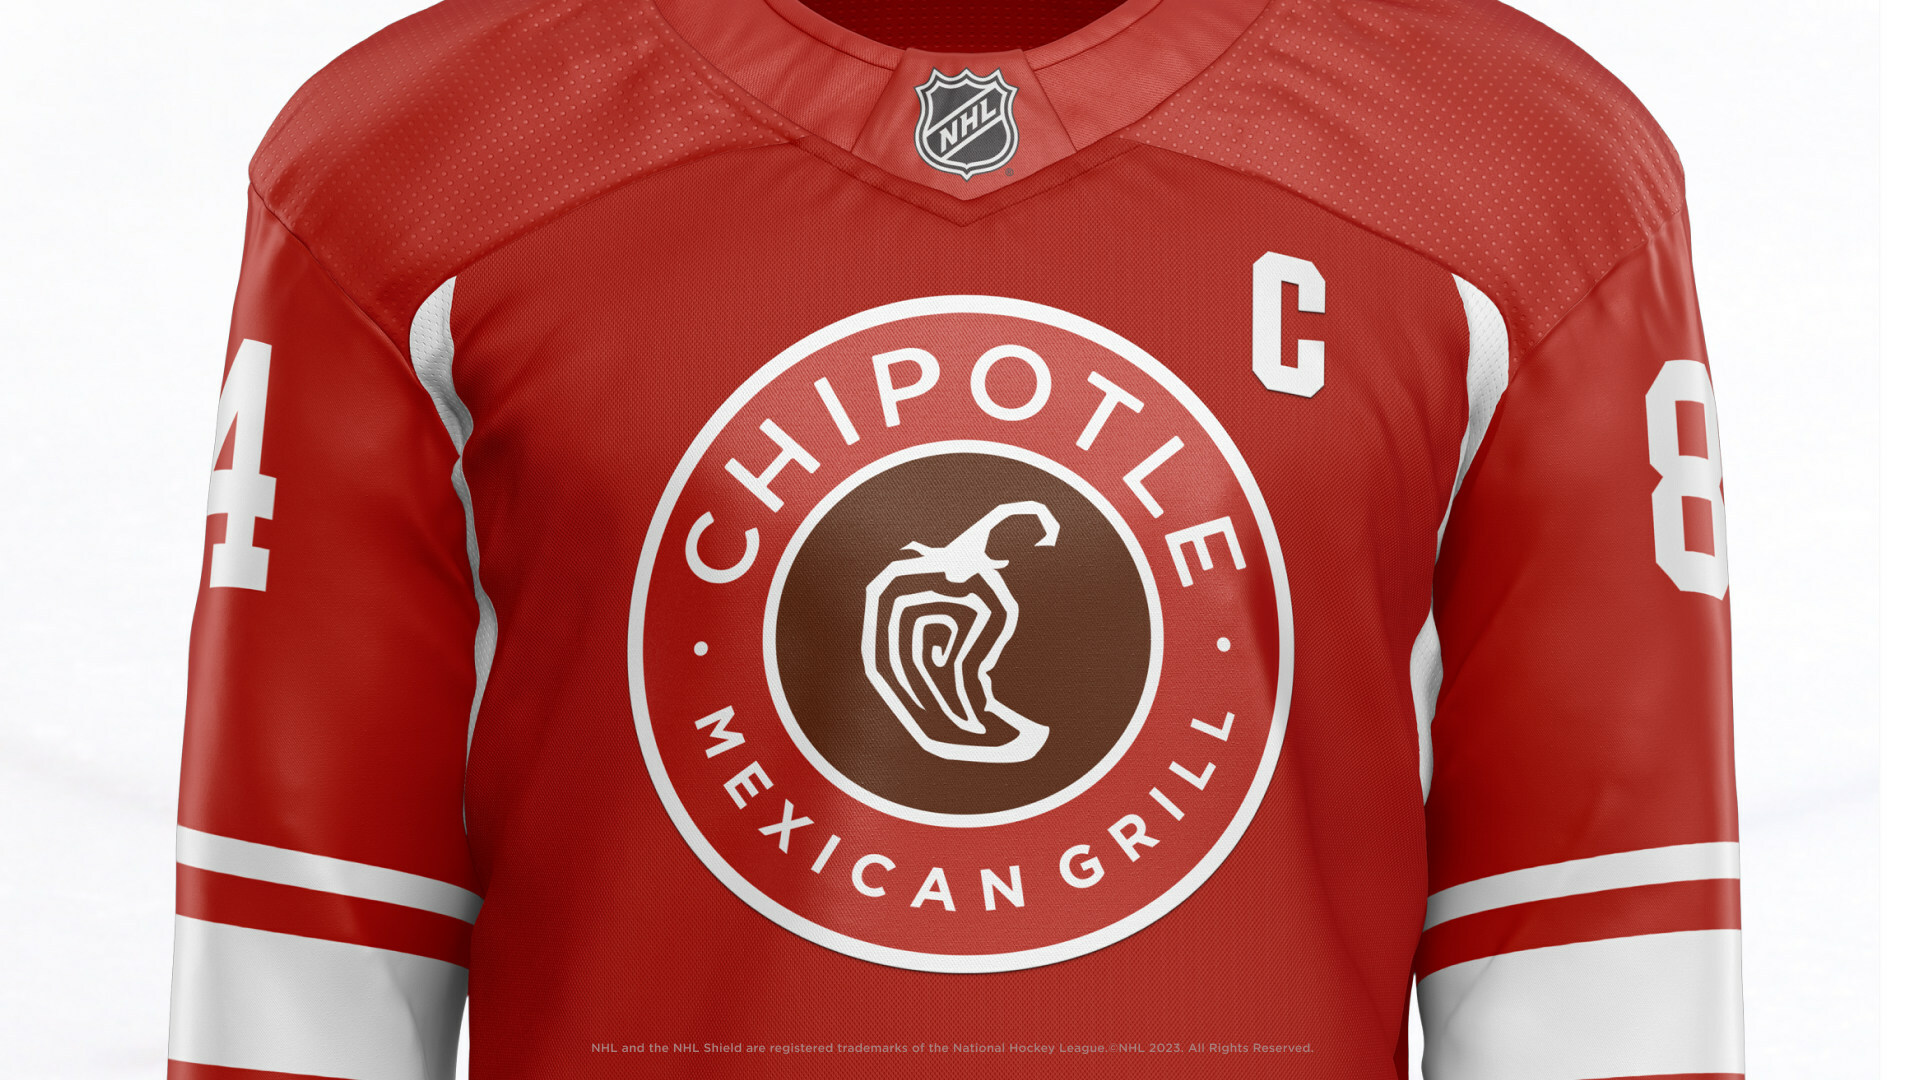 2023 Chipotle-USA Hockey National Championships Schedules Announced